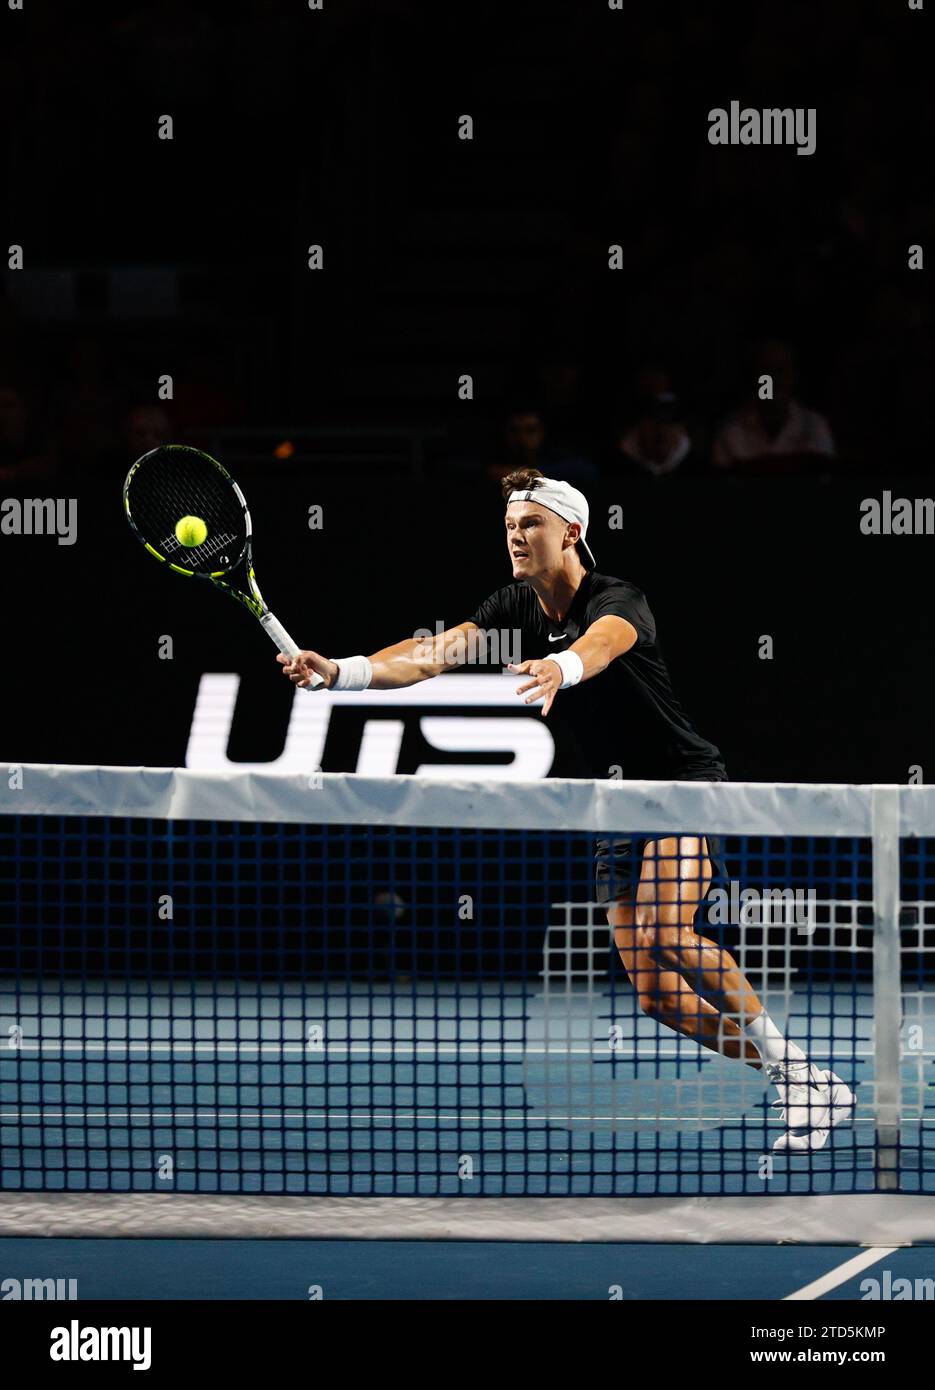 16th December 2023; ExCel Centre, Newham, London, England; Ultimate Tennis Showdown Grand Final Day 2; Holger Rune (The Viking) plays a forehand against Alexander Bublik (The Bublik Enemy) Stock Photo